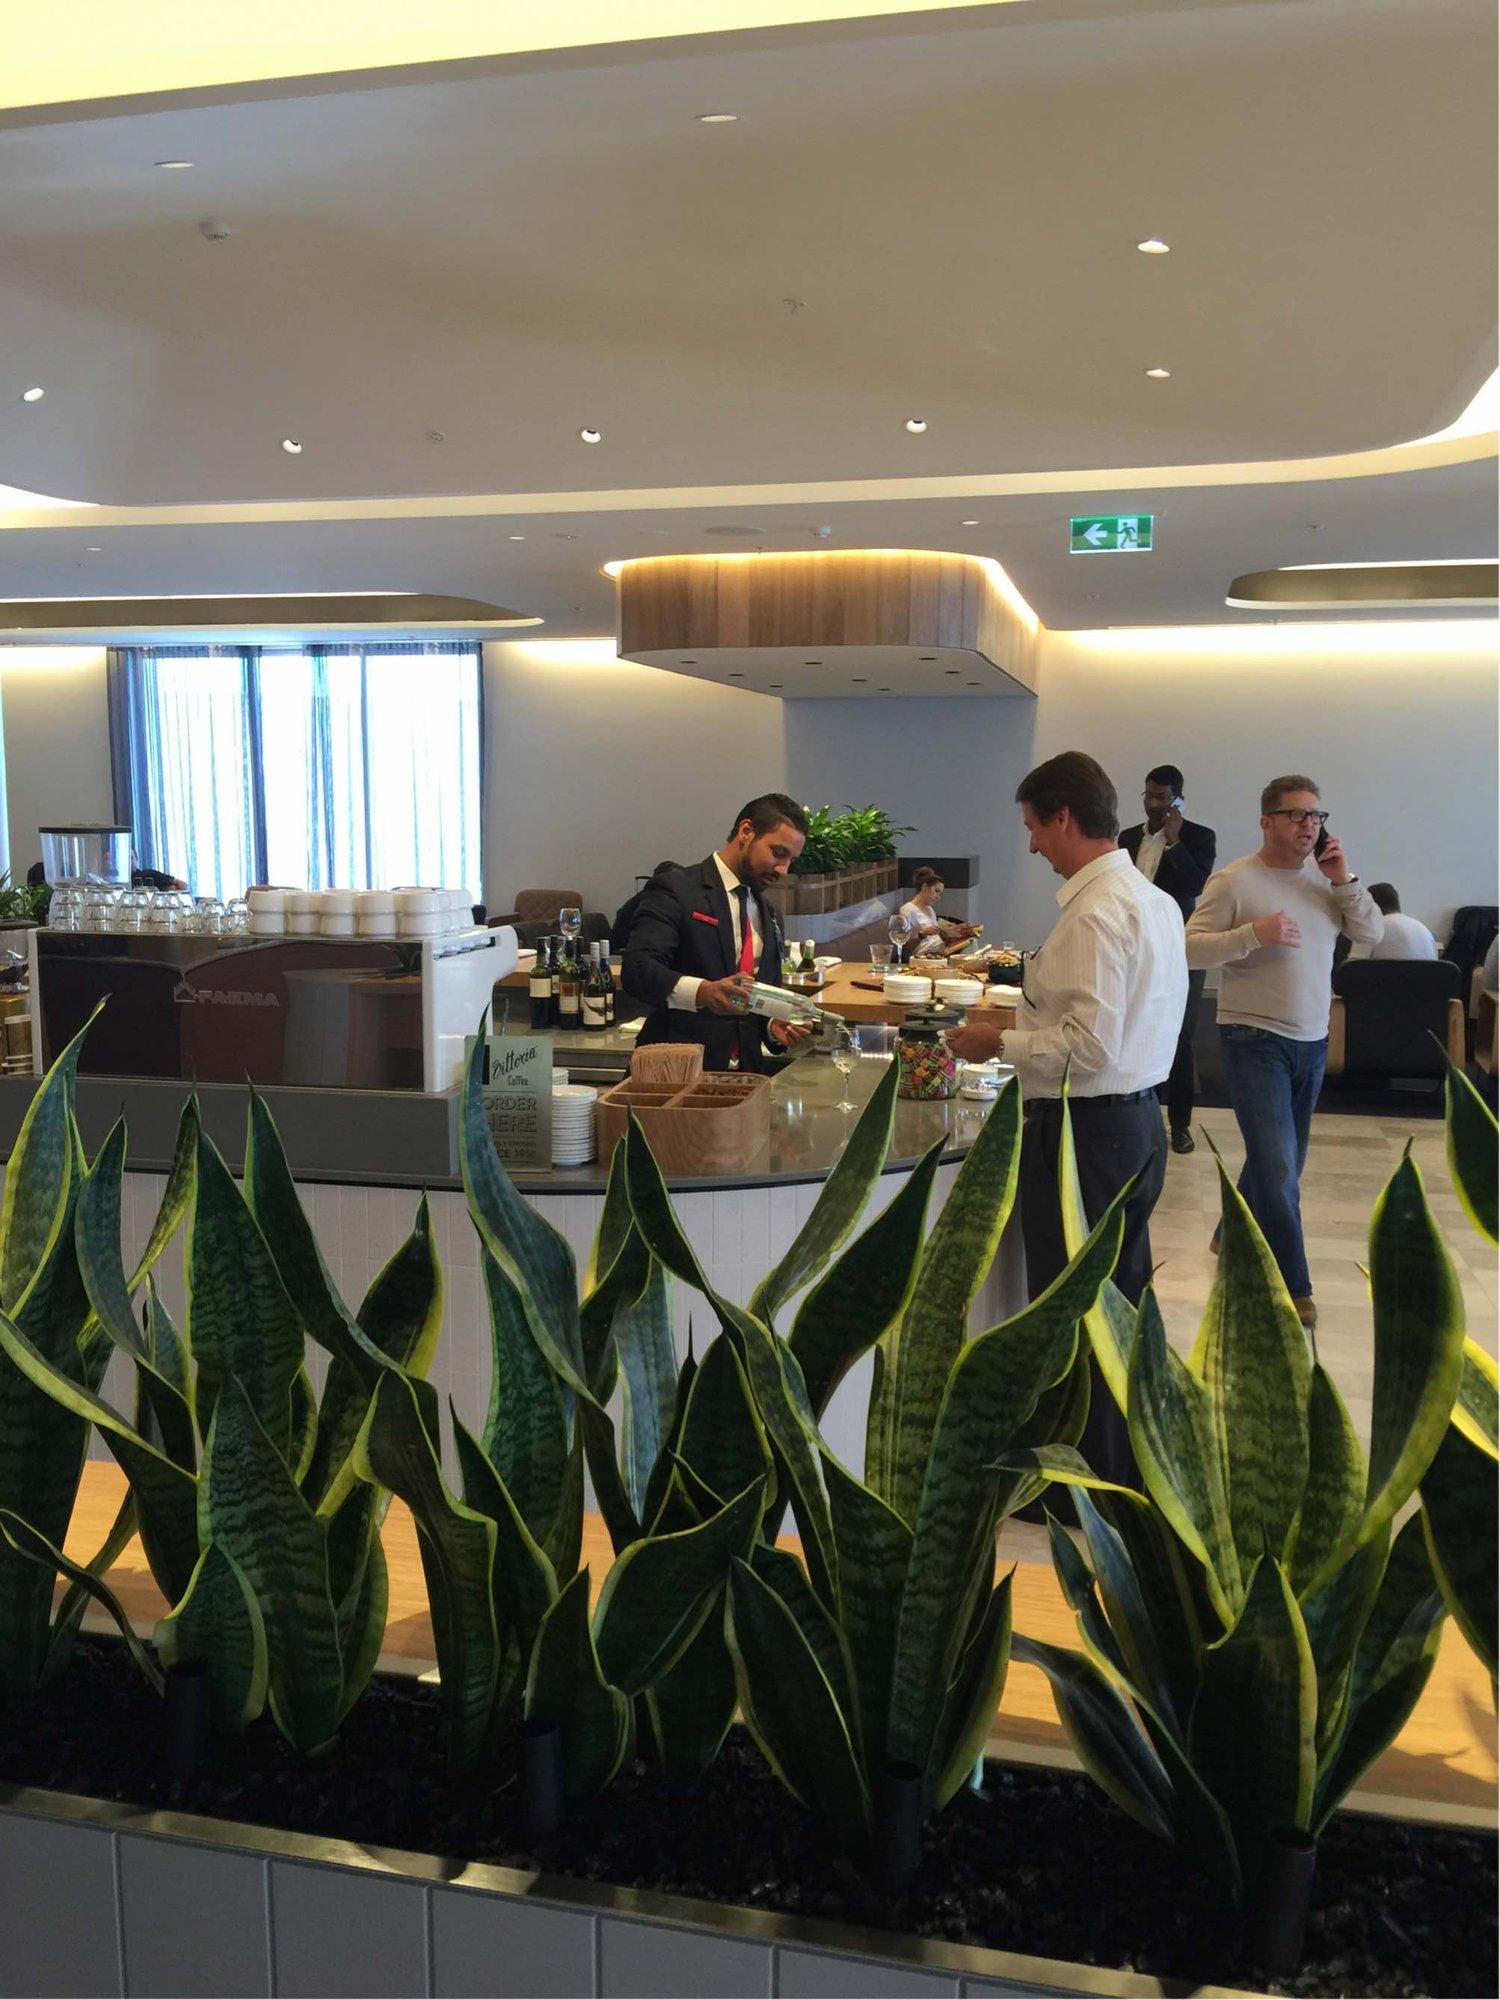 Qantas Airways Domestic and International Business Lounge image 2 of 5